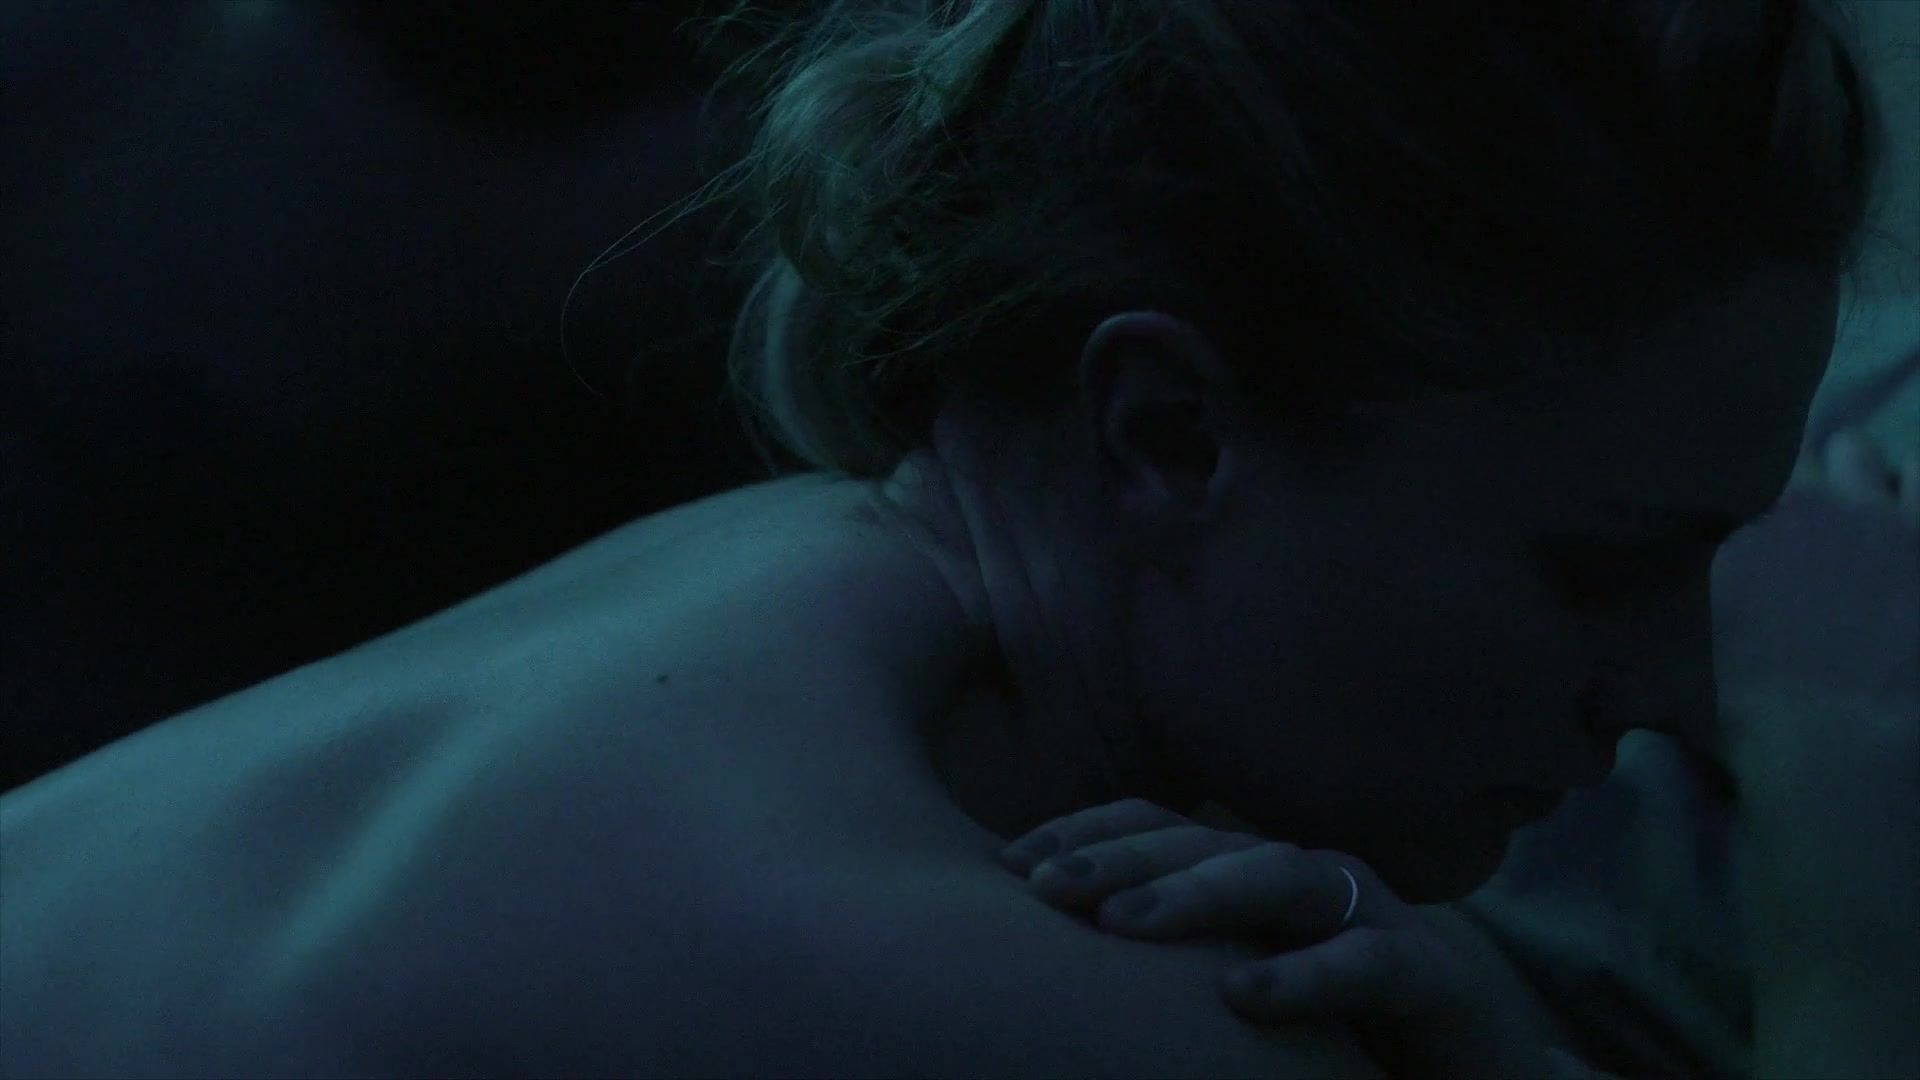 DownloadHelper Anna Paquin naked - The Affair s05e01 (2019) Smutty - 1